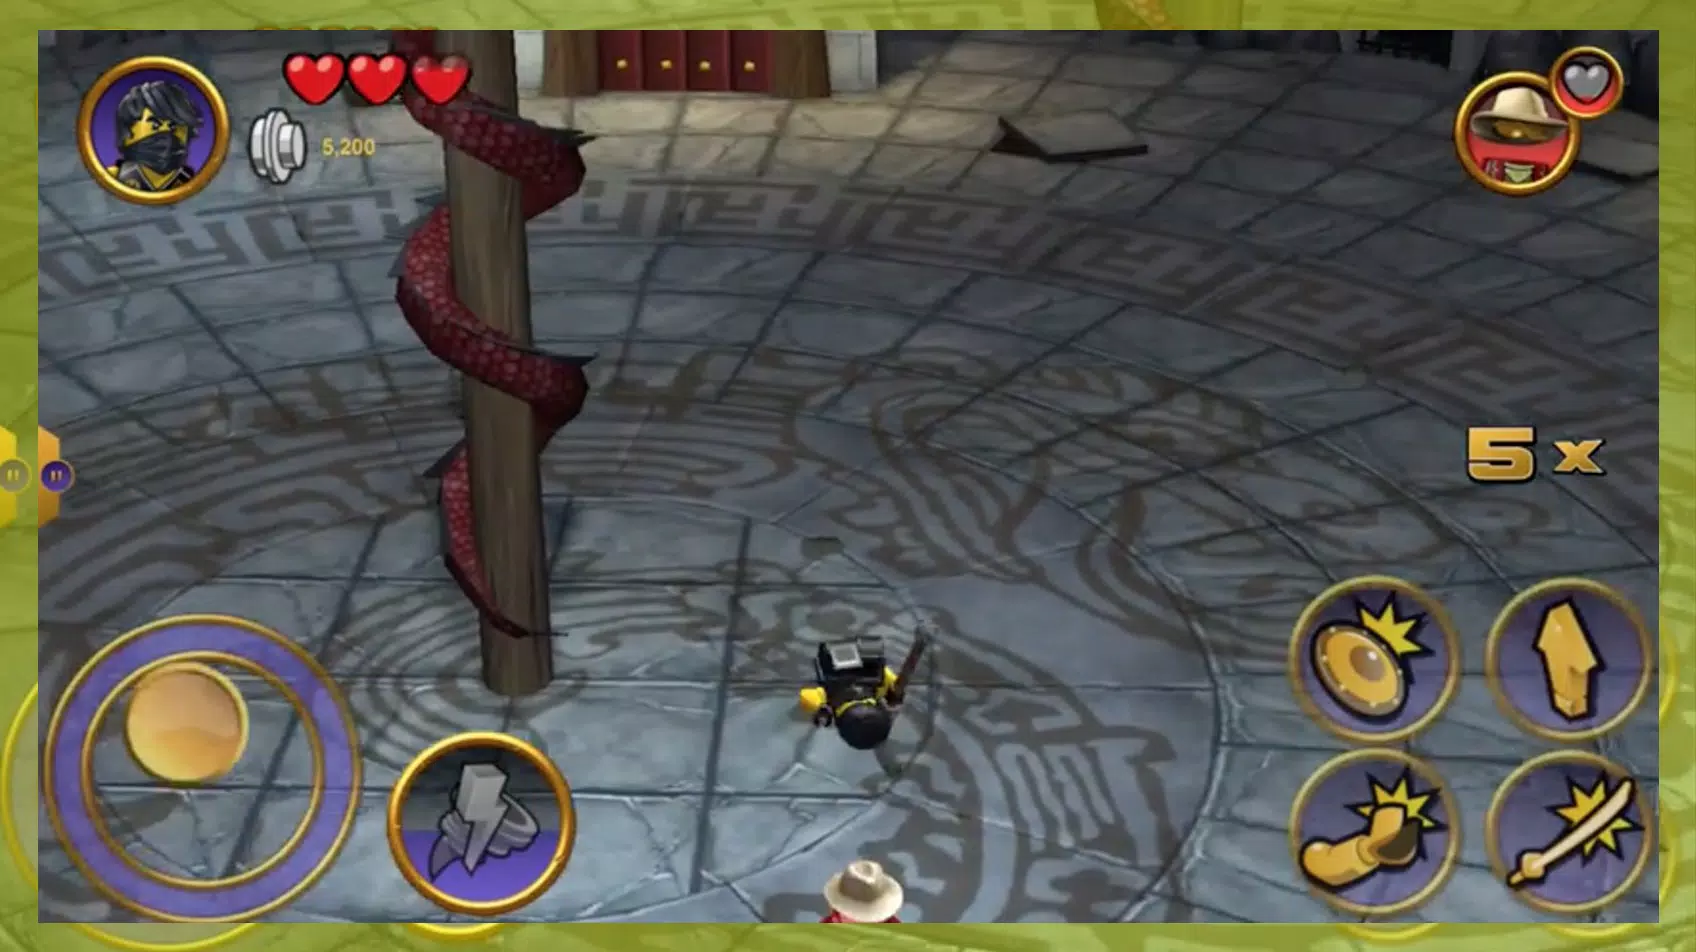 Tips Lego Ninjago Tournament 18 Video Game for Android - APK Download